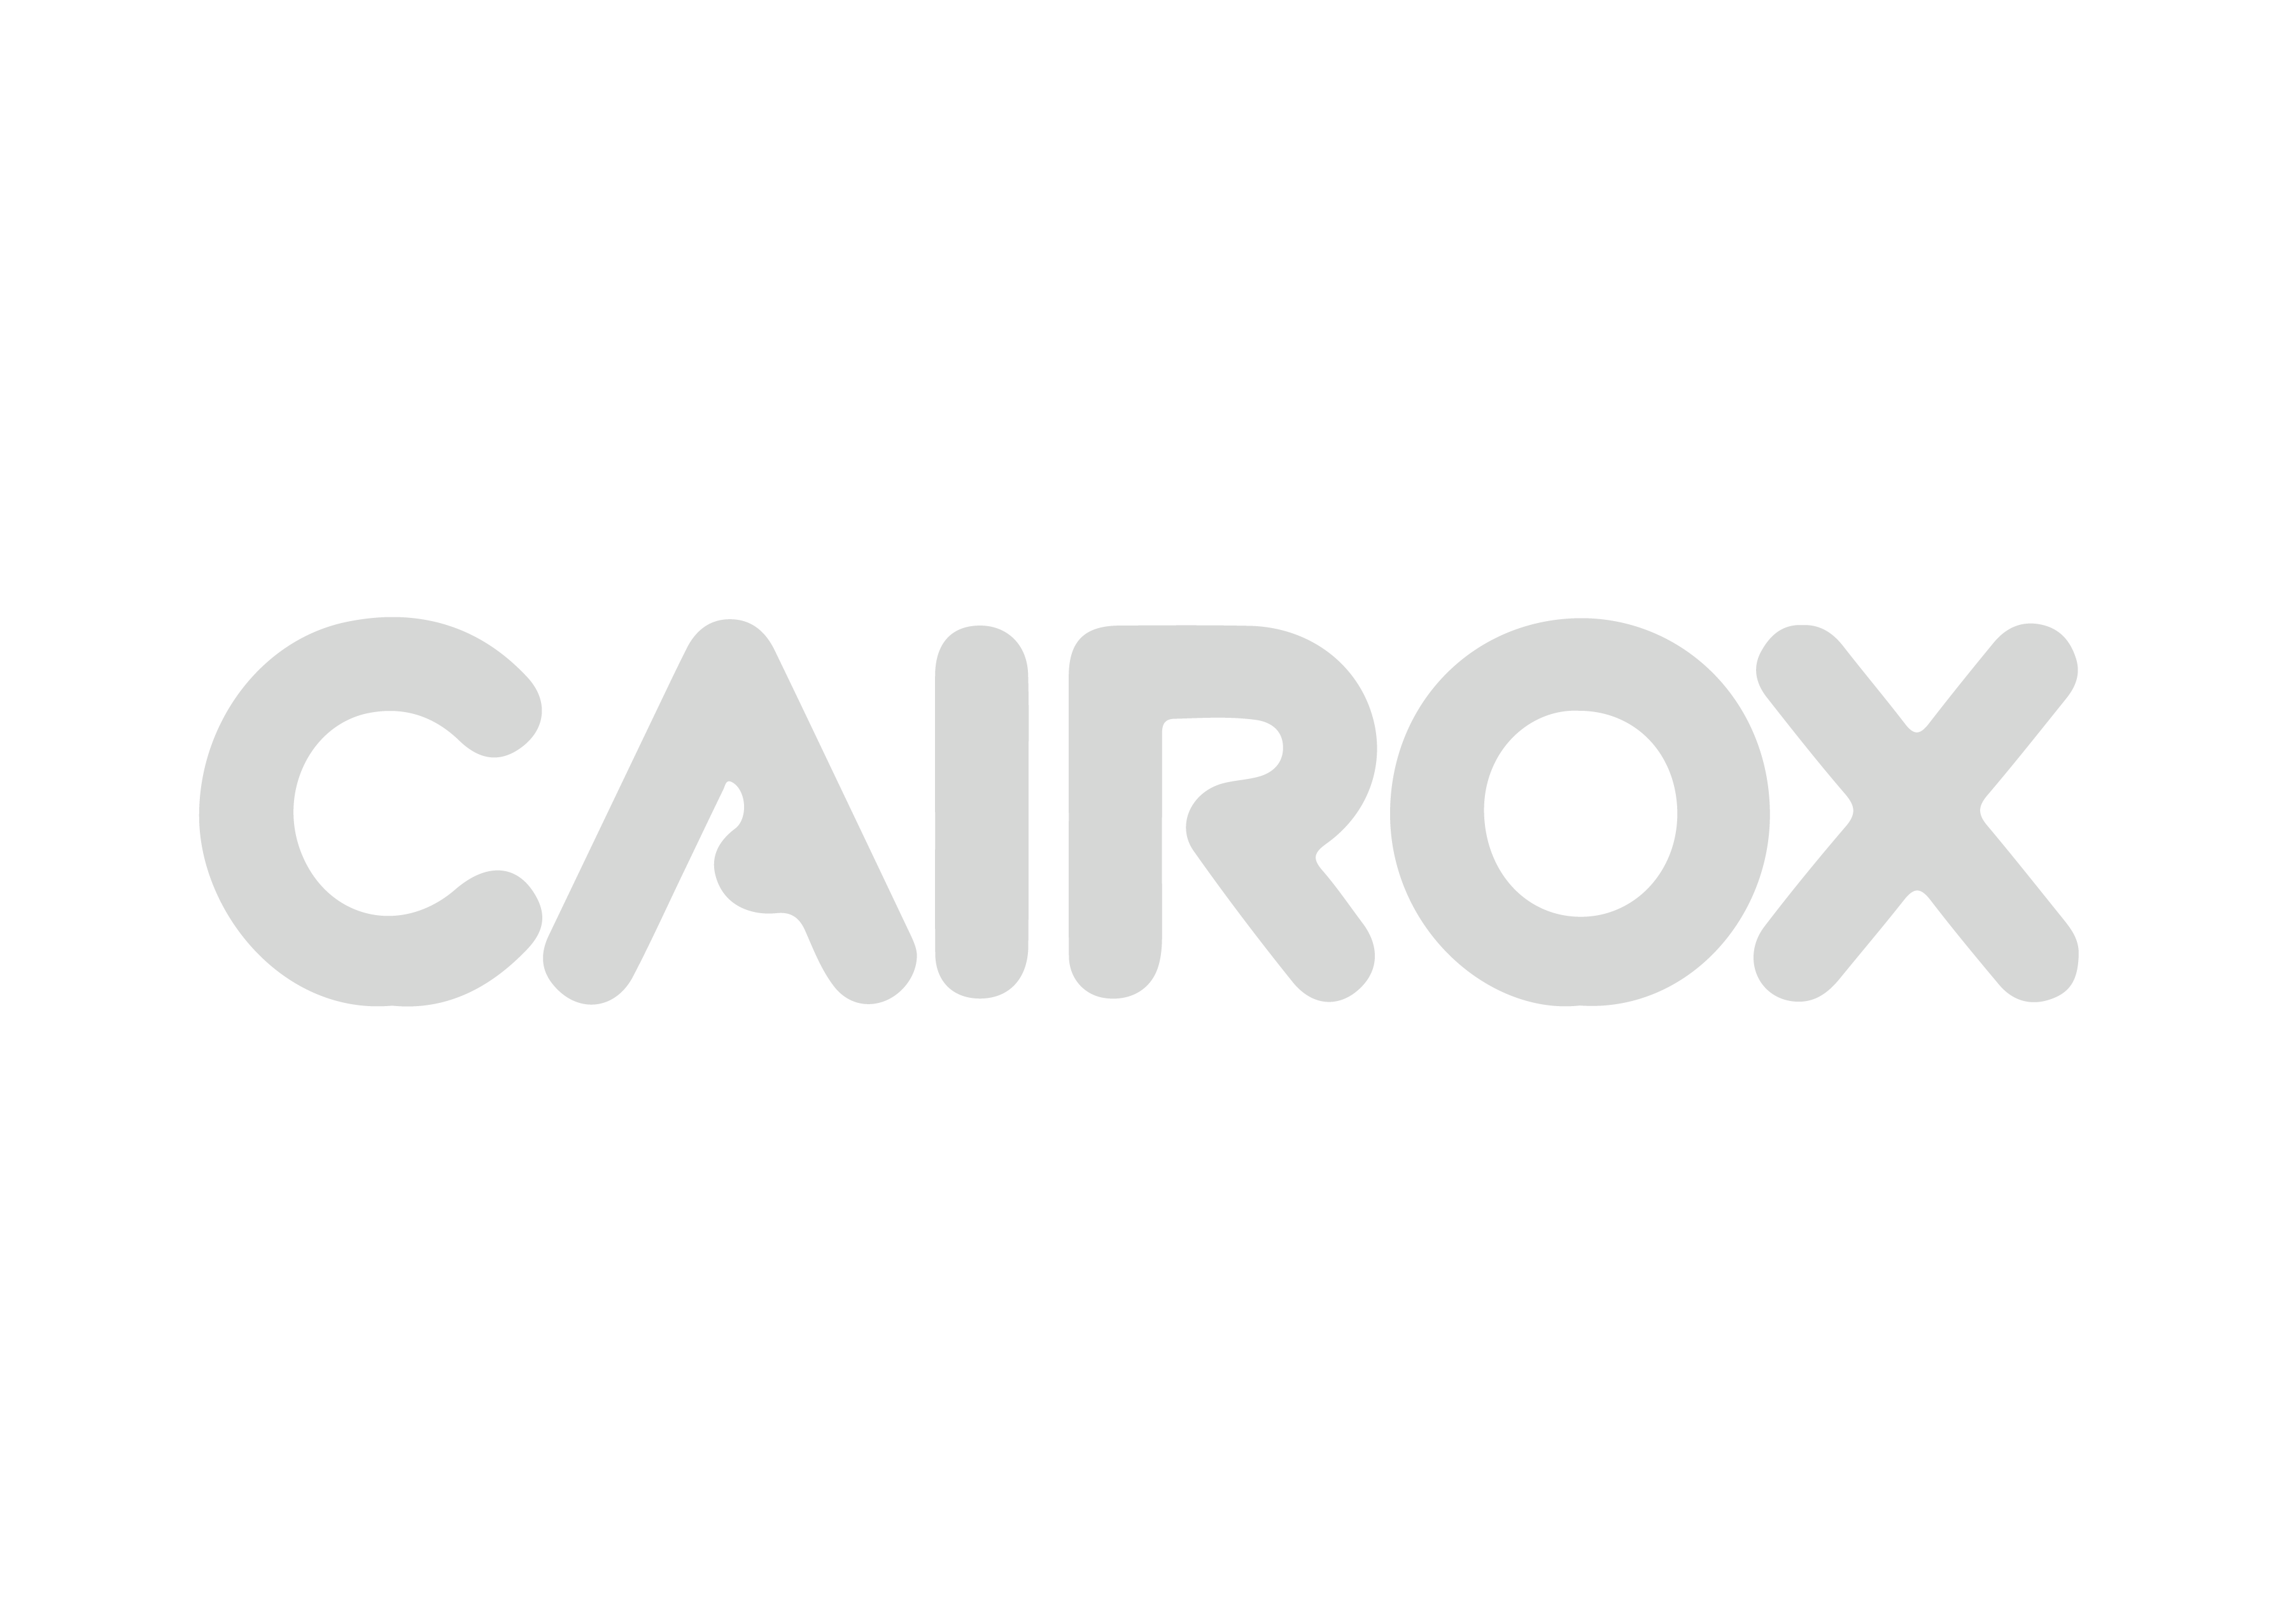 Project One Partner-Cairox